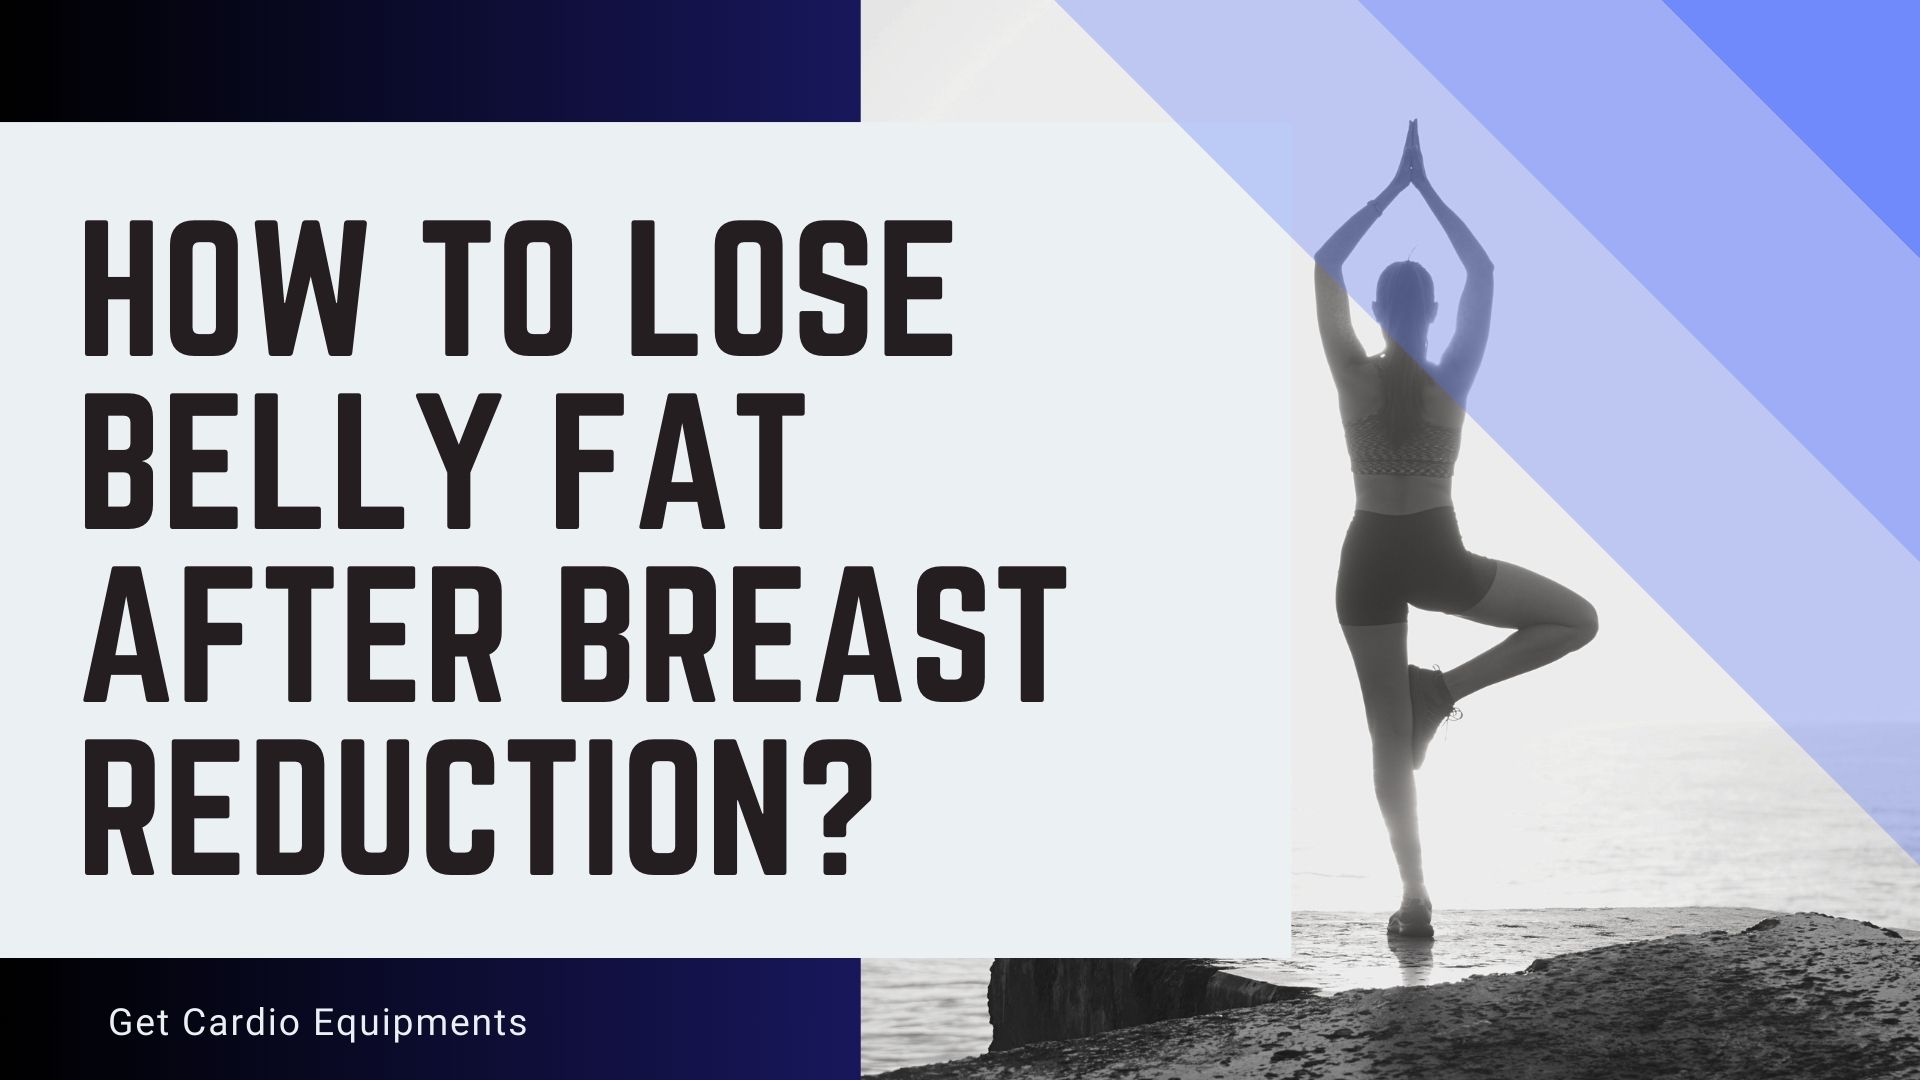 How to Lose Belly Fat After Breast Reduction? Complete Guide